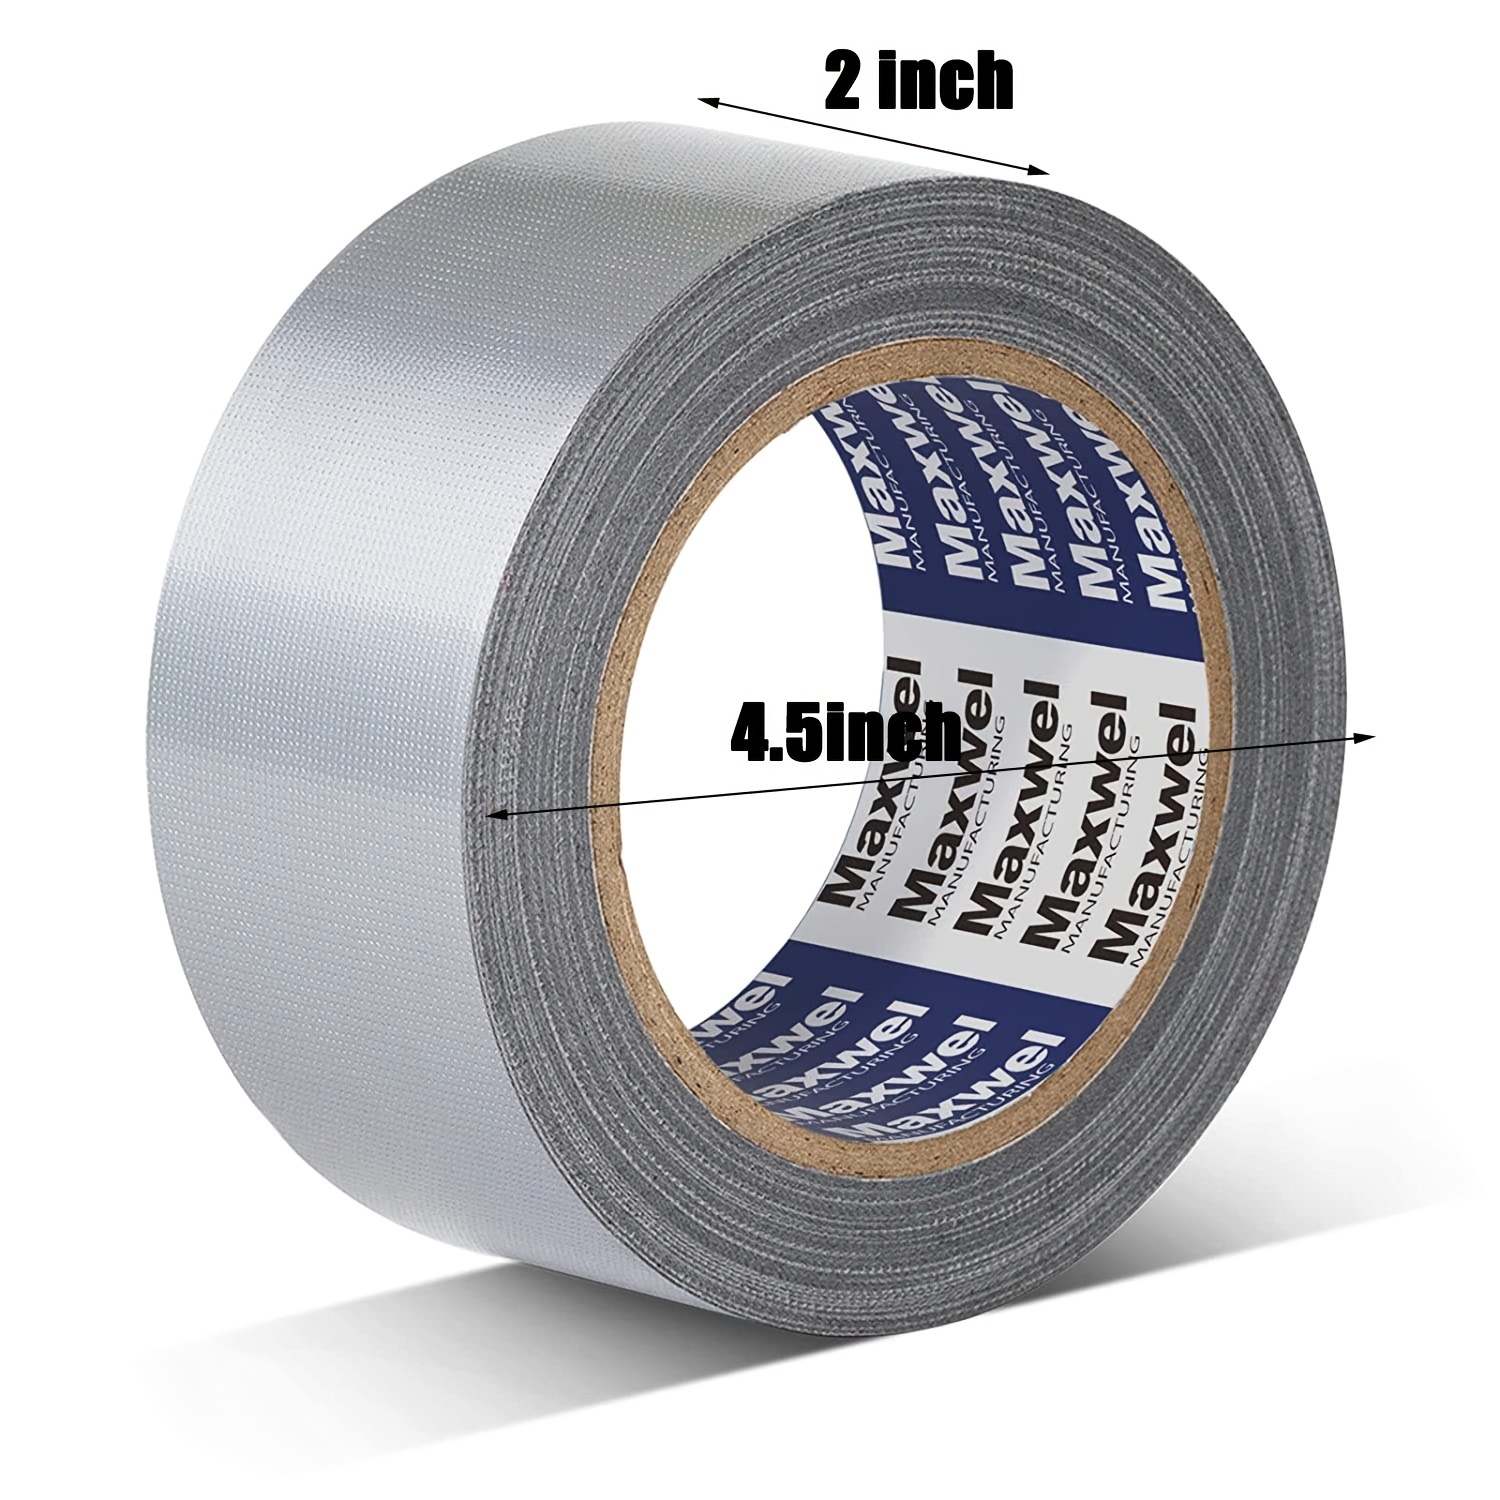 Duct Tape Heavy Duty - 5 Roll Multi Pack - Silver 90 Feet x 2 Inch -  Strong, Flexible, No Residue, All-Weather and Tear by Hand - Bulk Value for  Do-It-Yourself Repairs